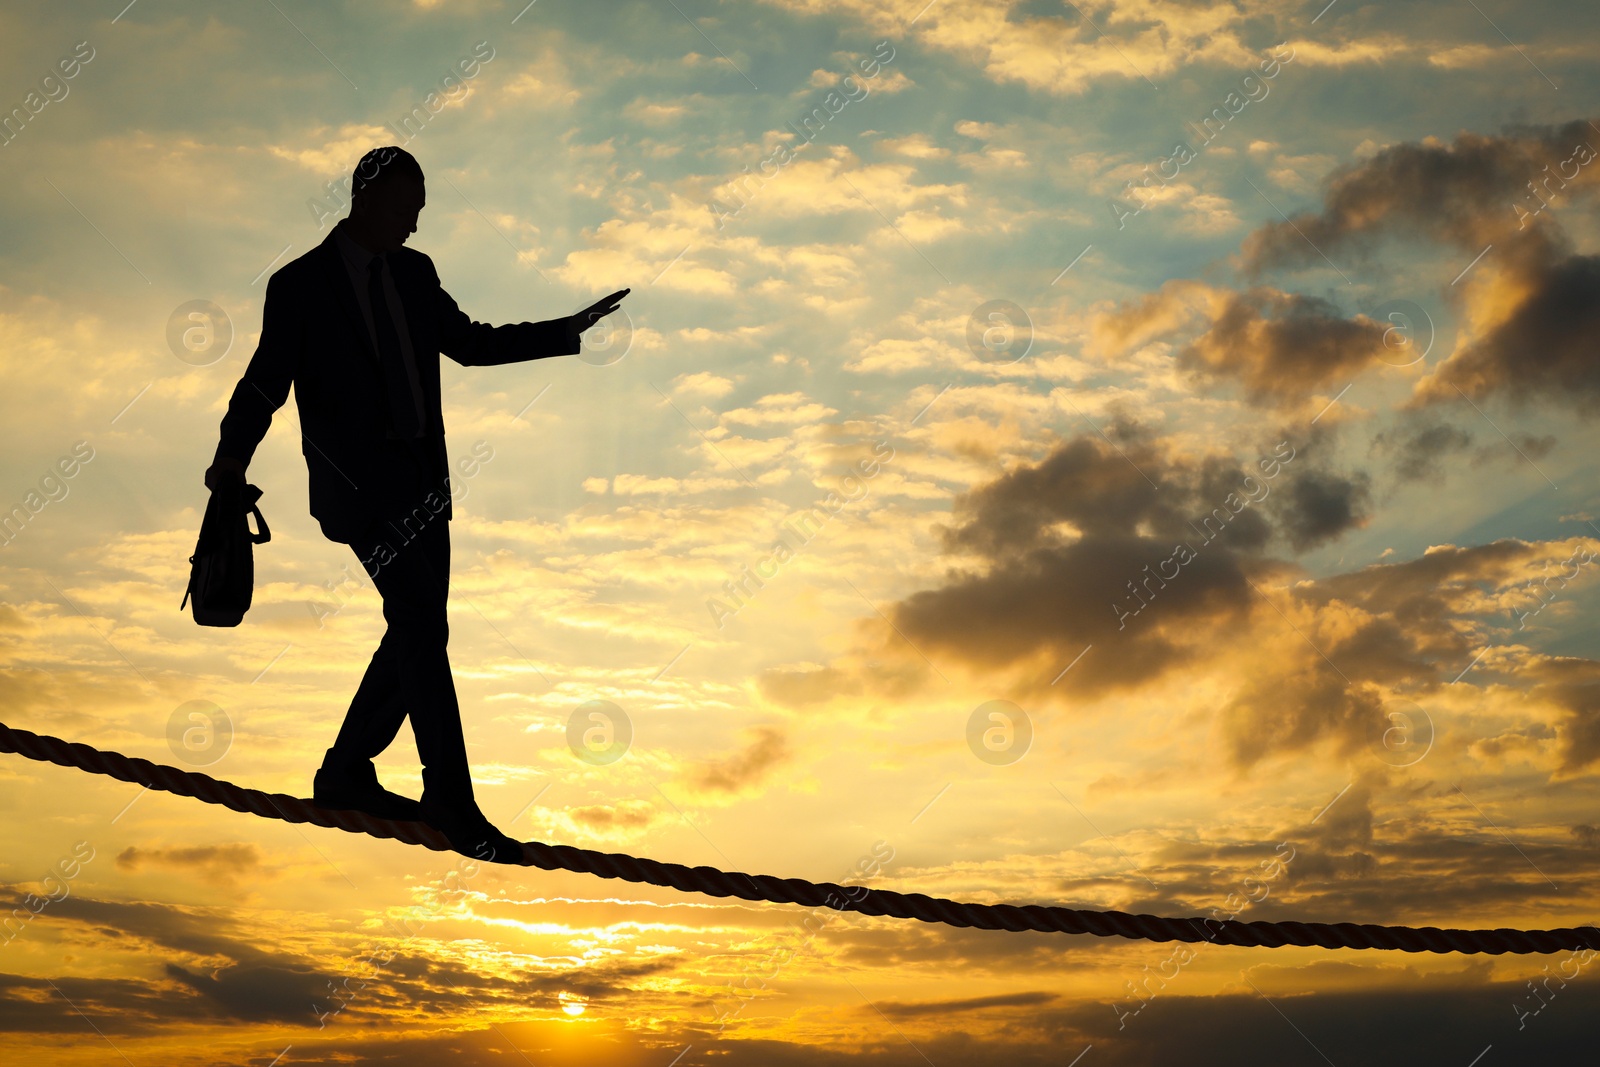 Image of Risks and challenges of owning business. Silhouette of man balancing on rope in sunset sky